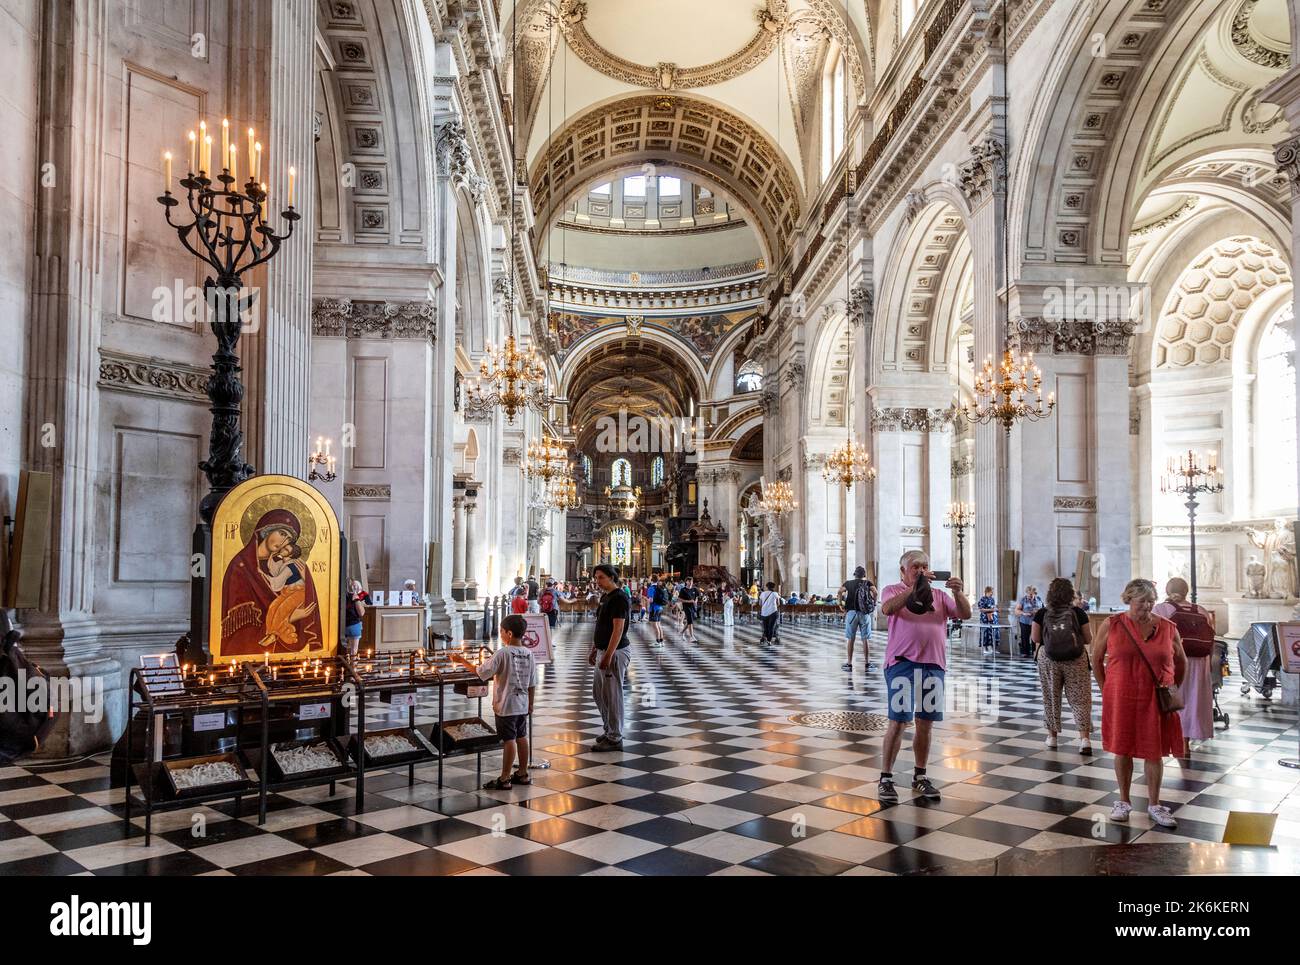 Interior of St. Pauls Cathedral London Stock Photo